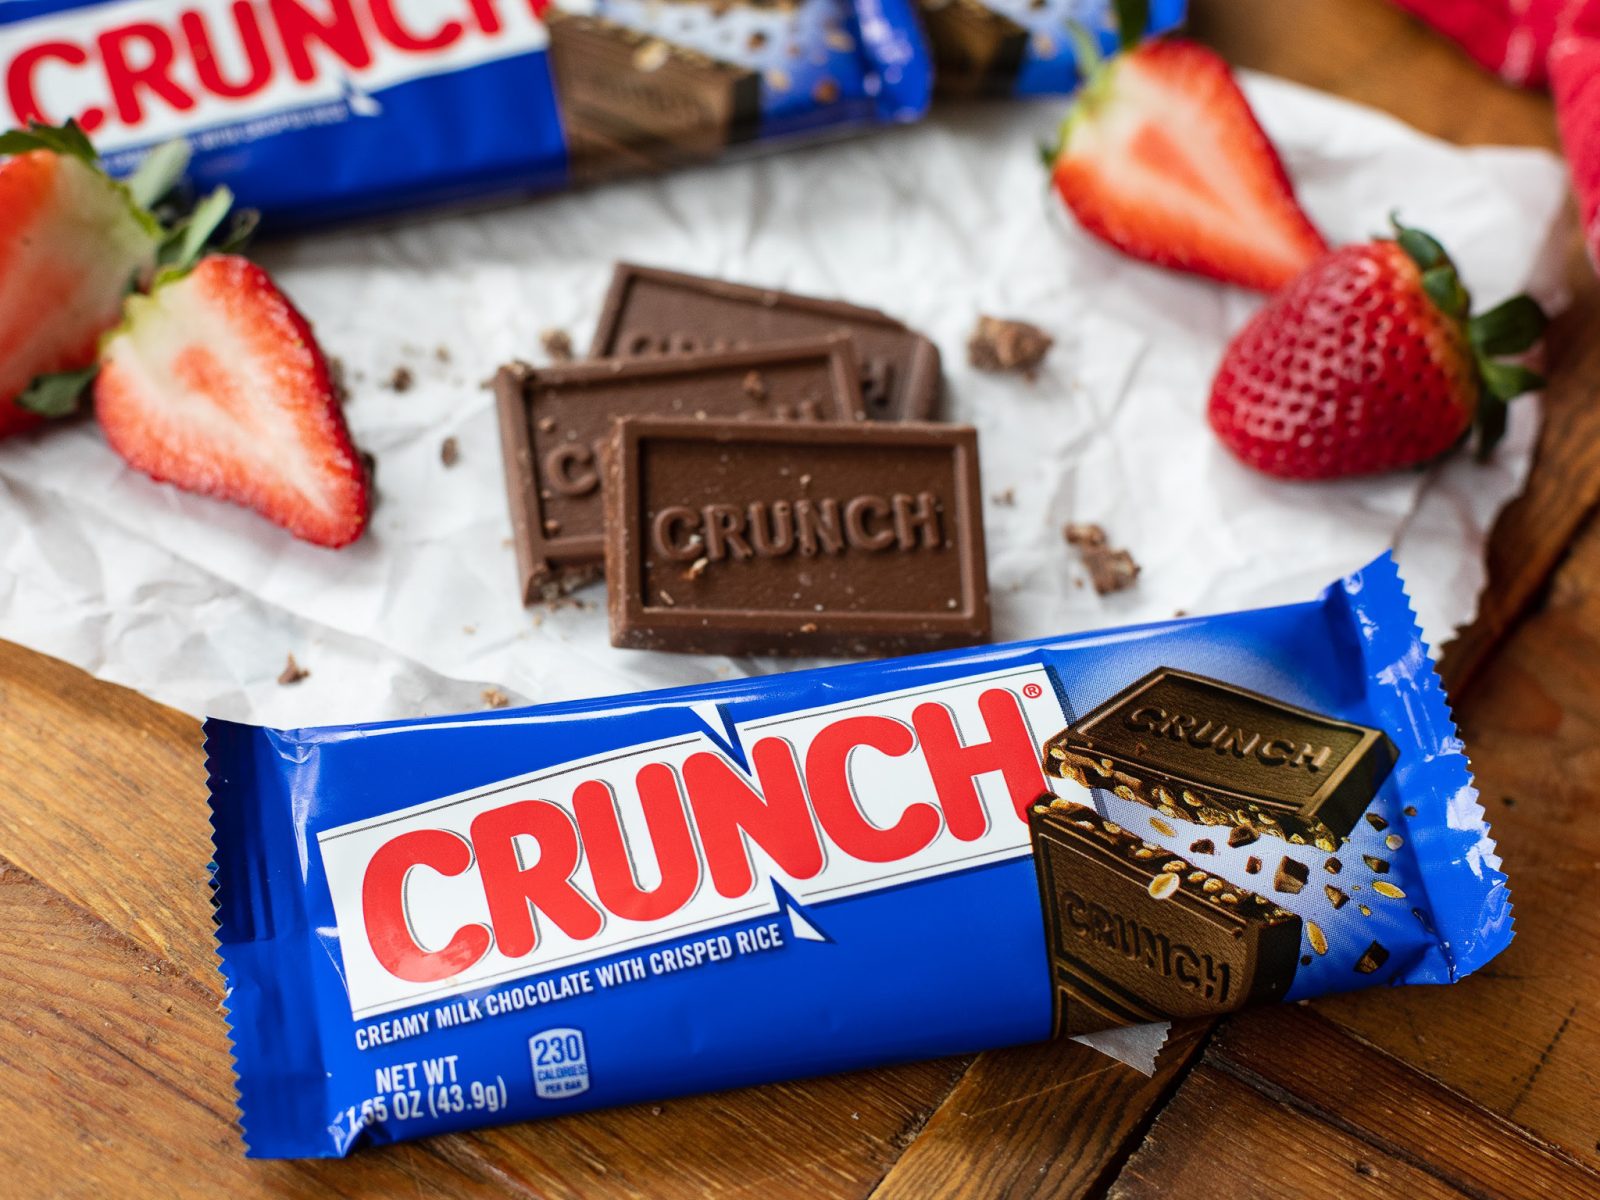 Grab Nestle Crunch Chocolate Bars For Just 75¢ At Kroger